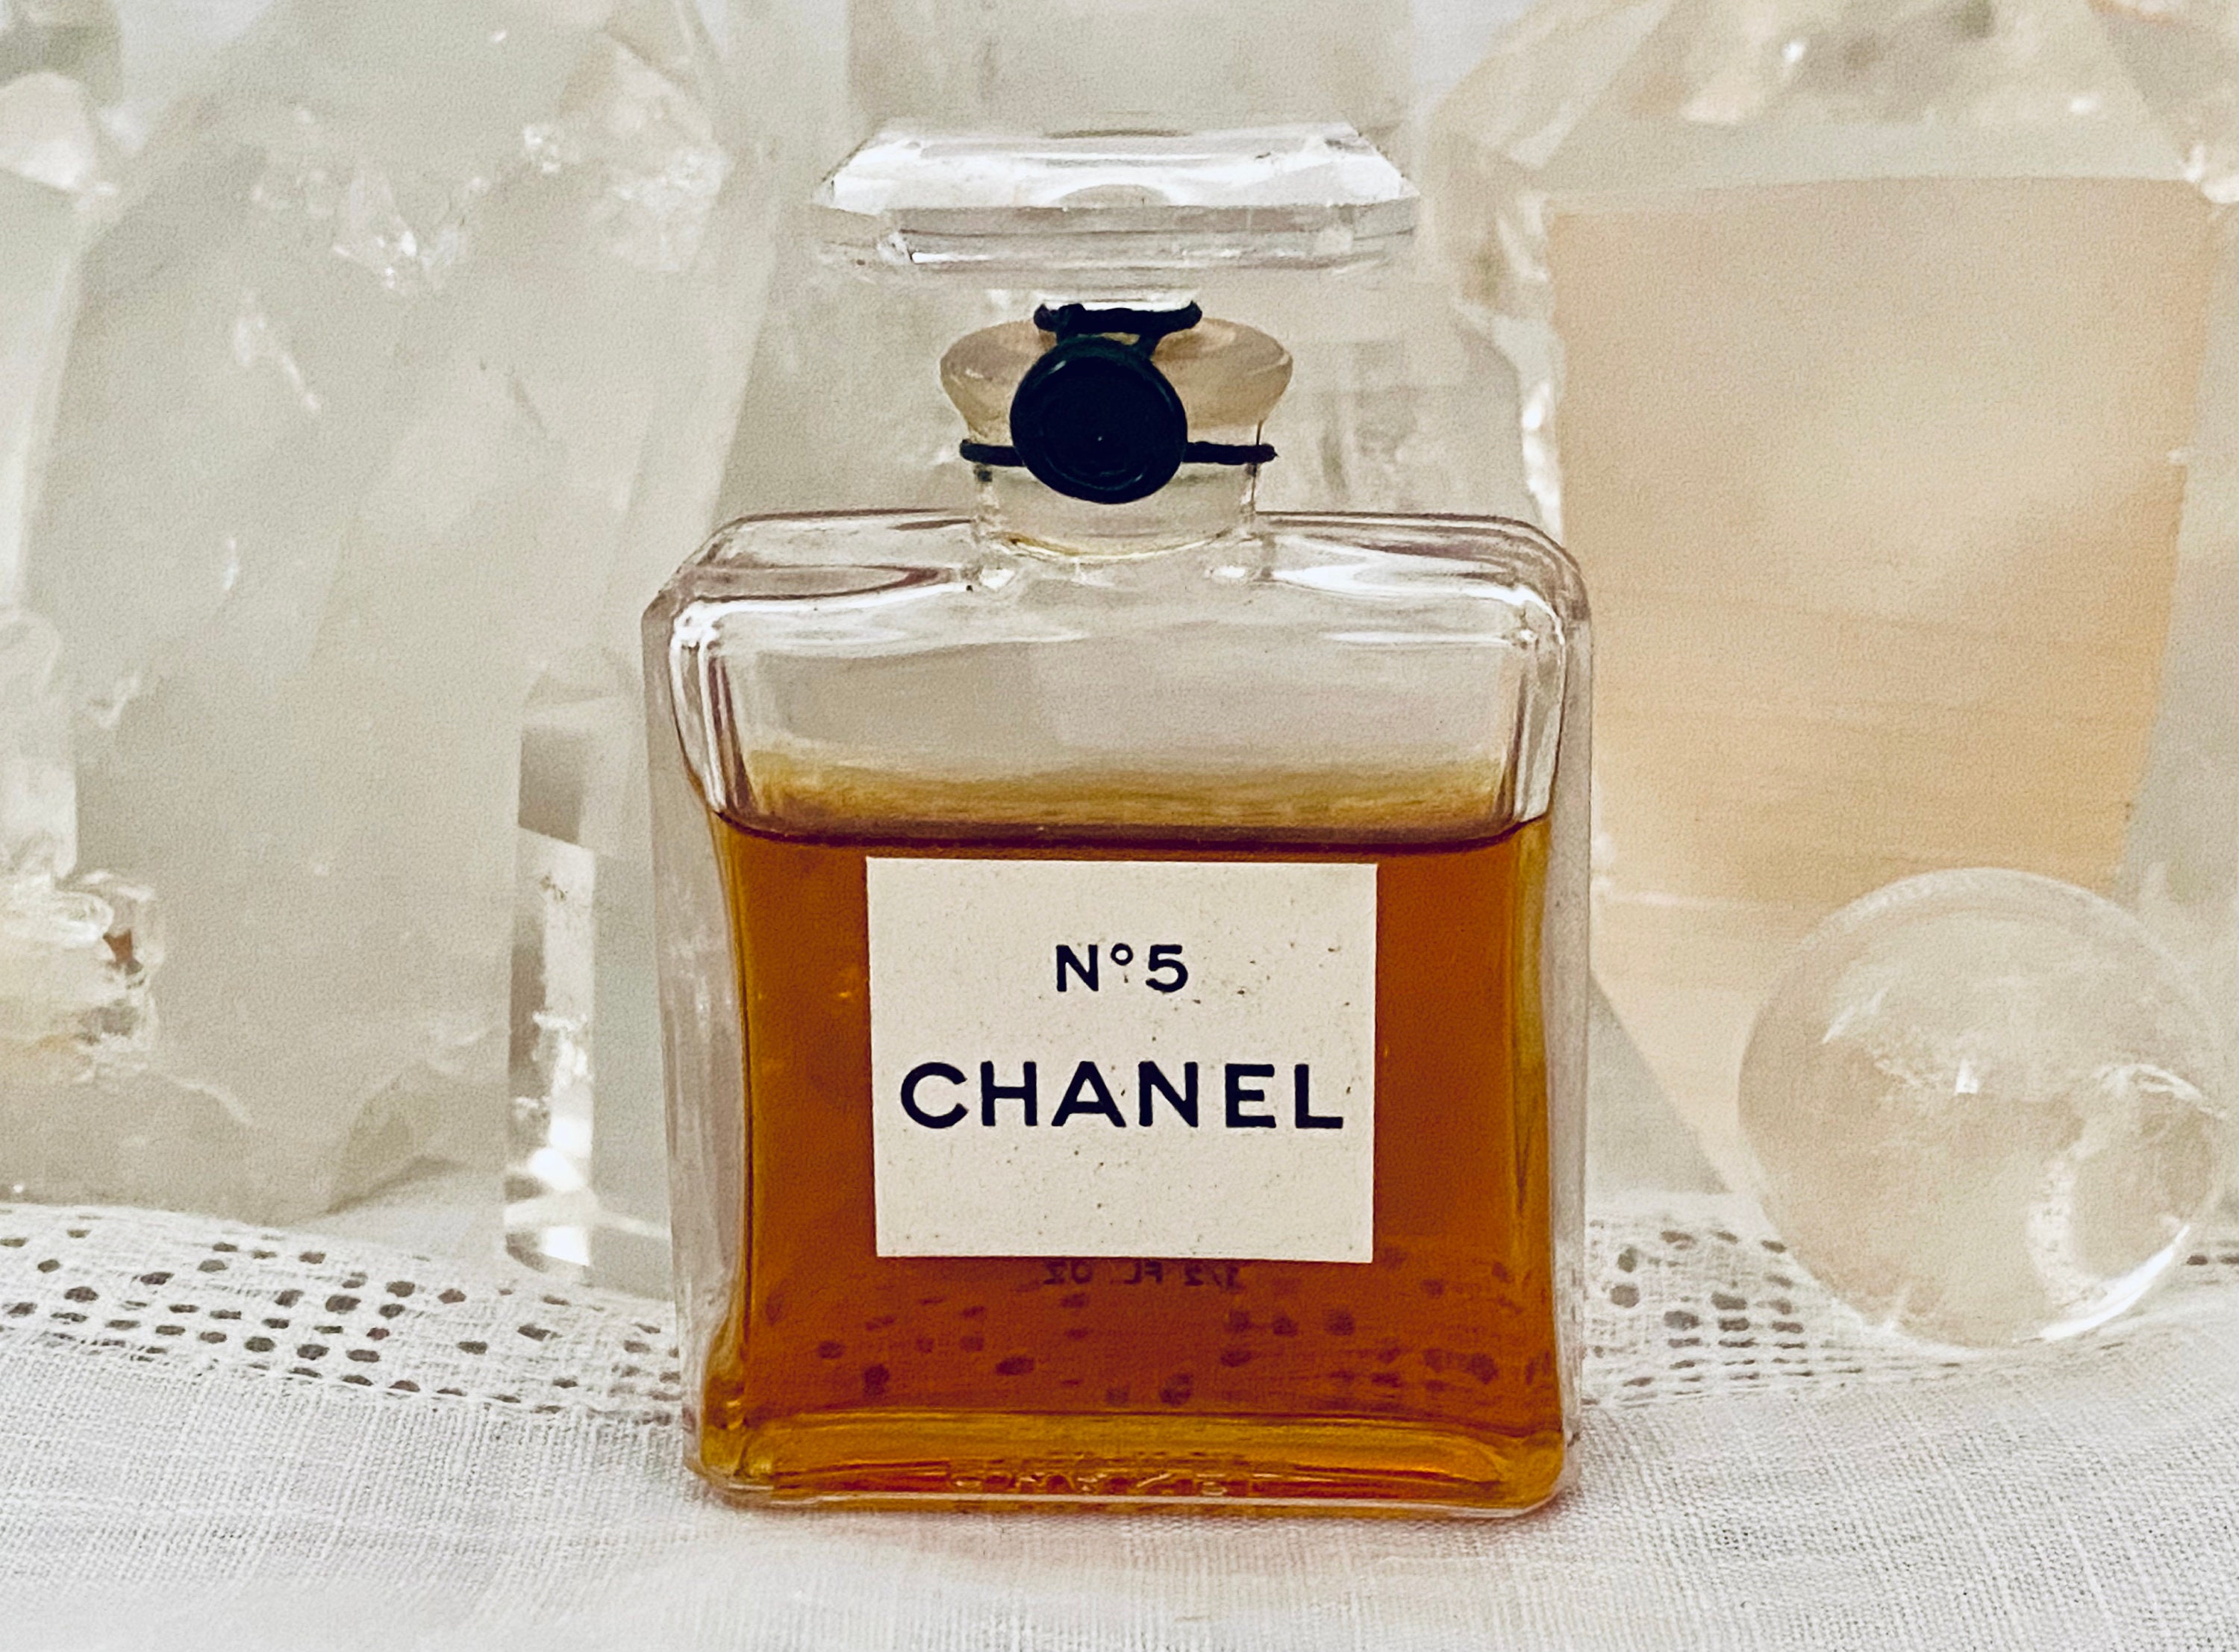 5 things to know about the major Chanel exhibition coming to London   Evening Standard